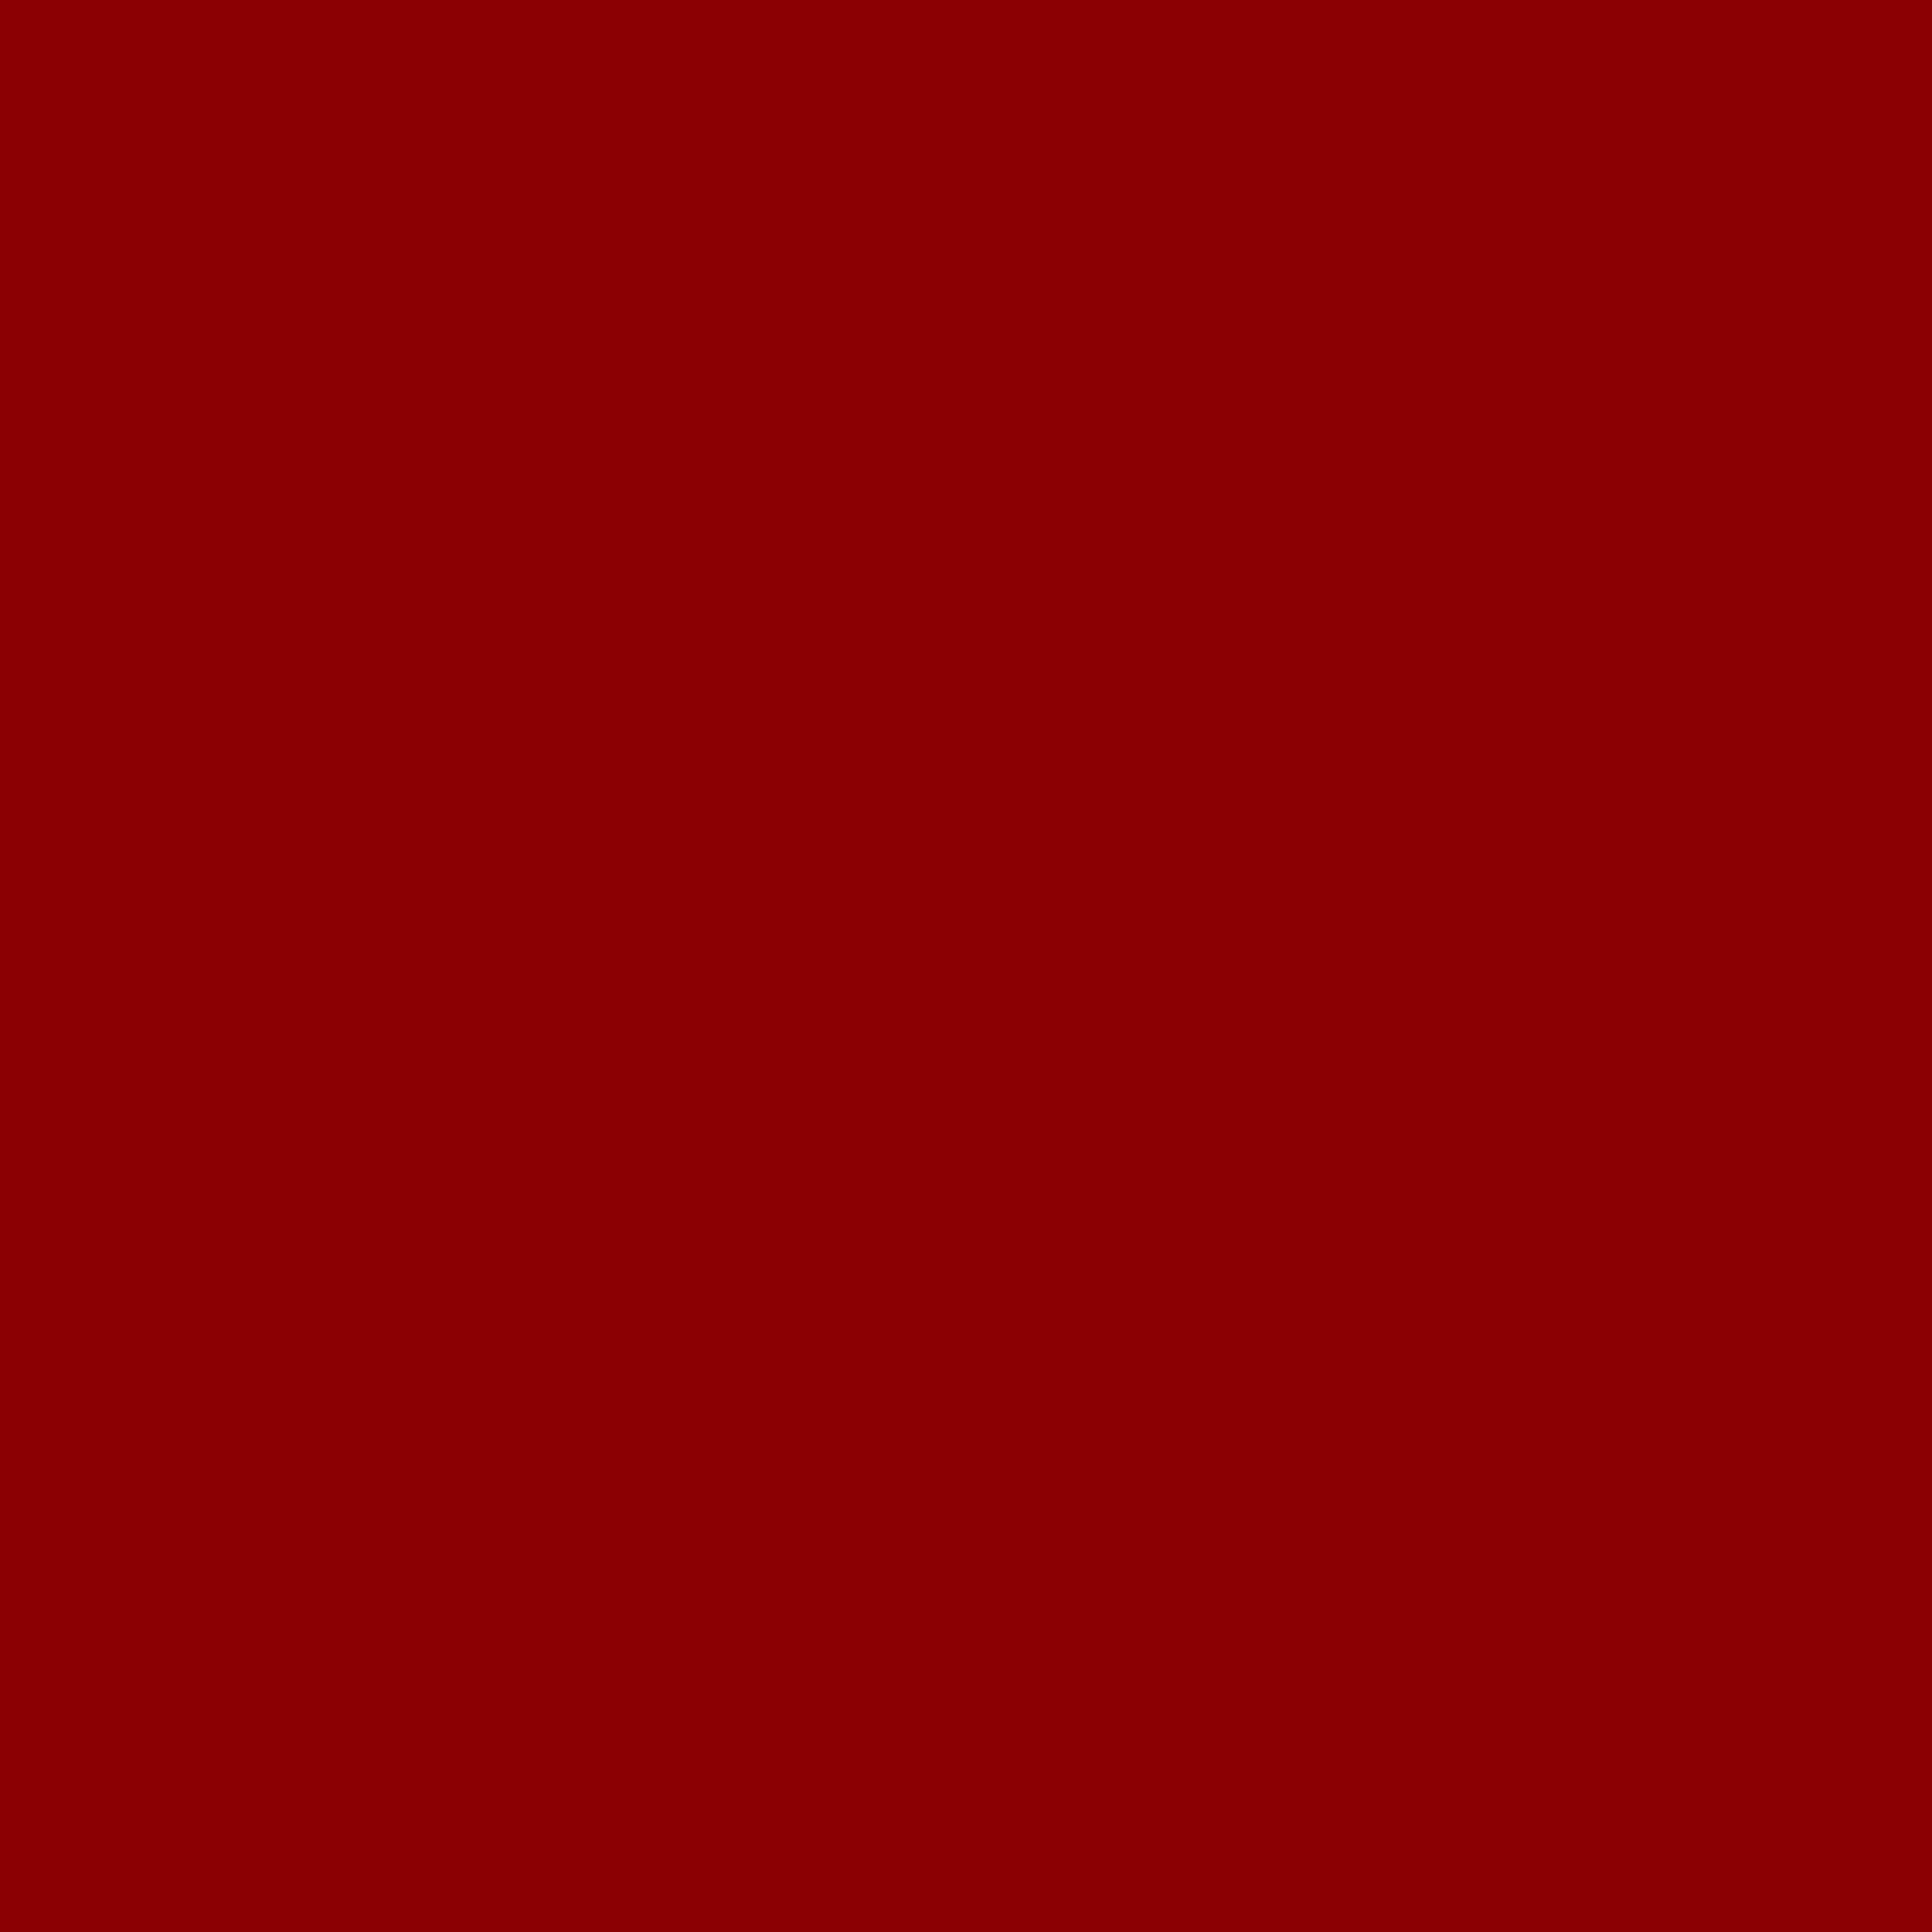 2732x2732 Dark Red Solid Color Background